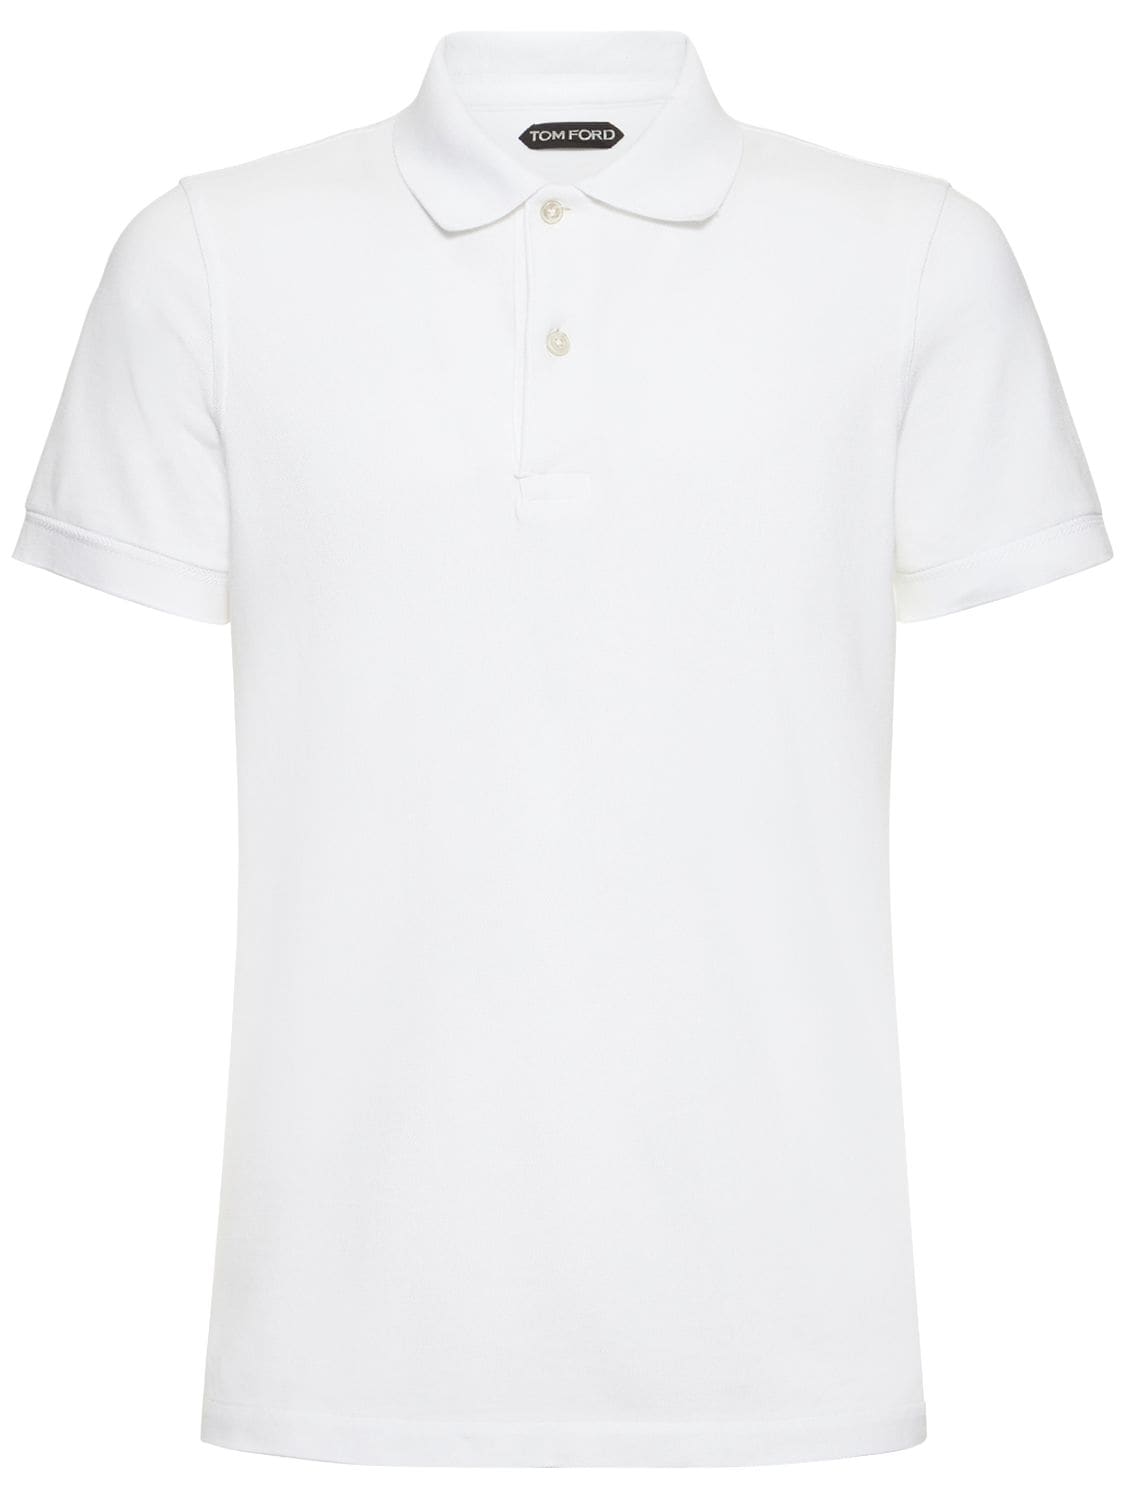 Tom Ford Tennis S/s Piquet Polo In White